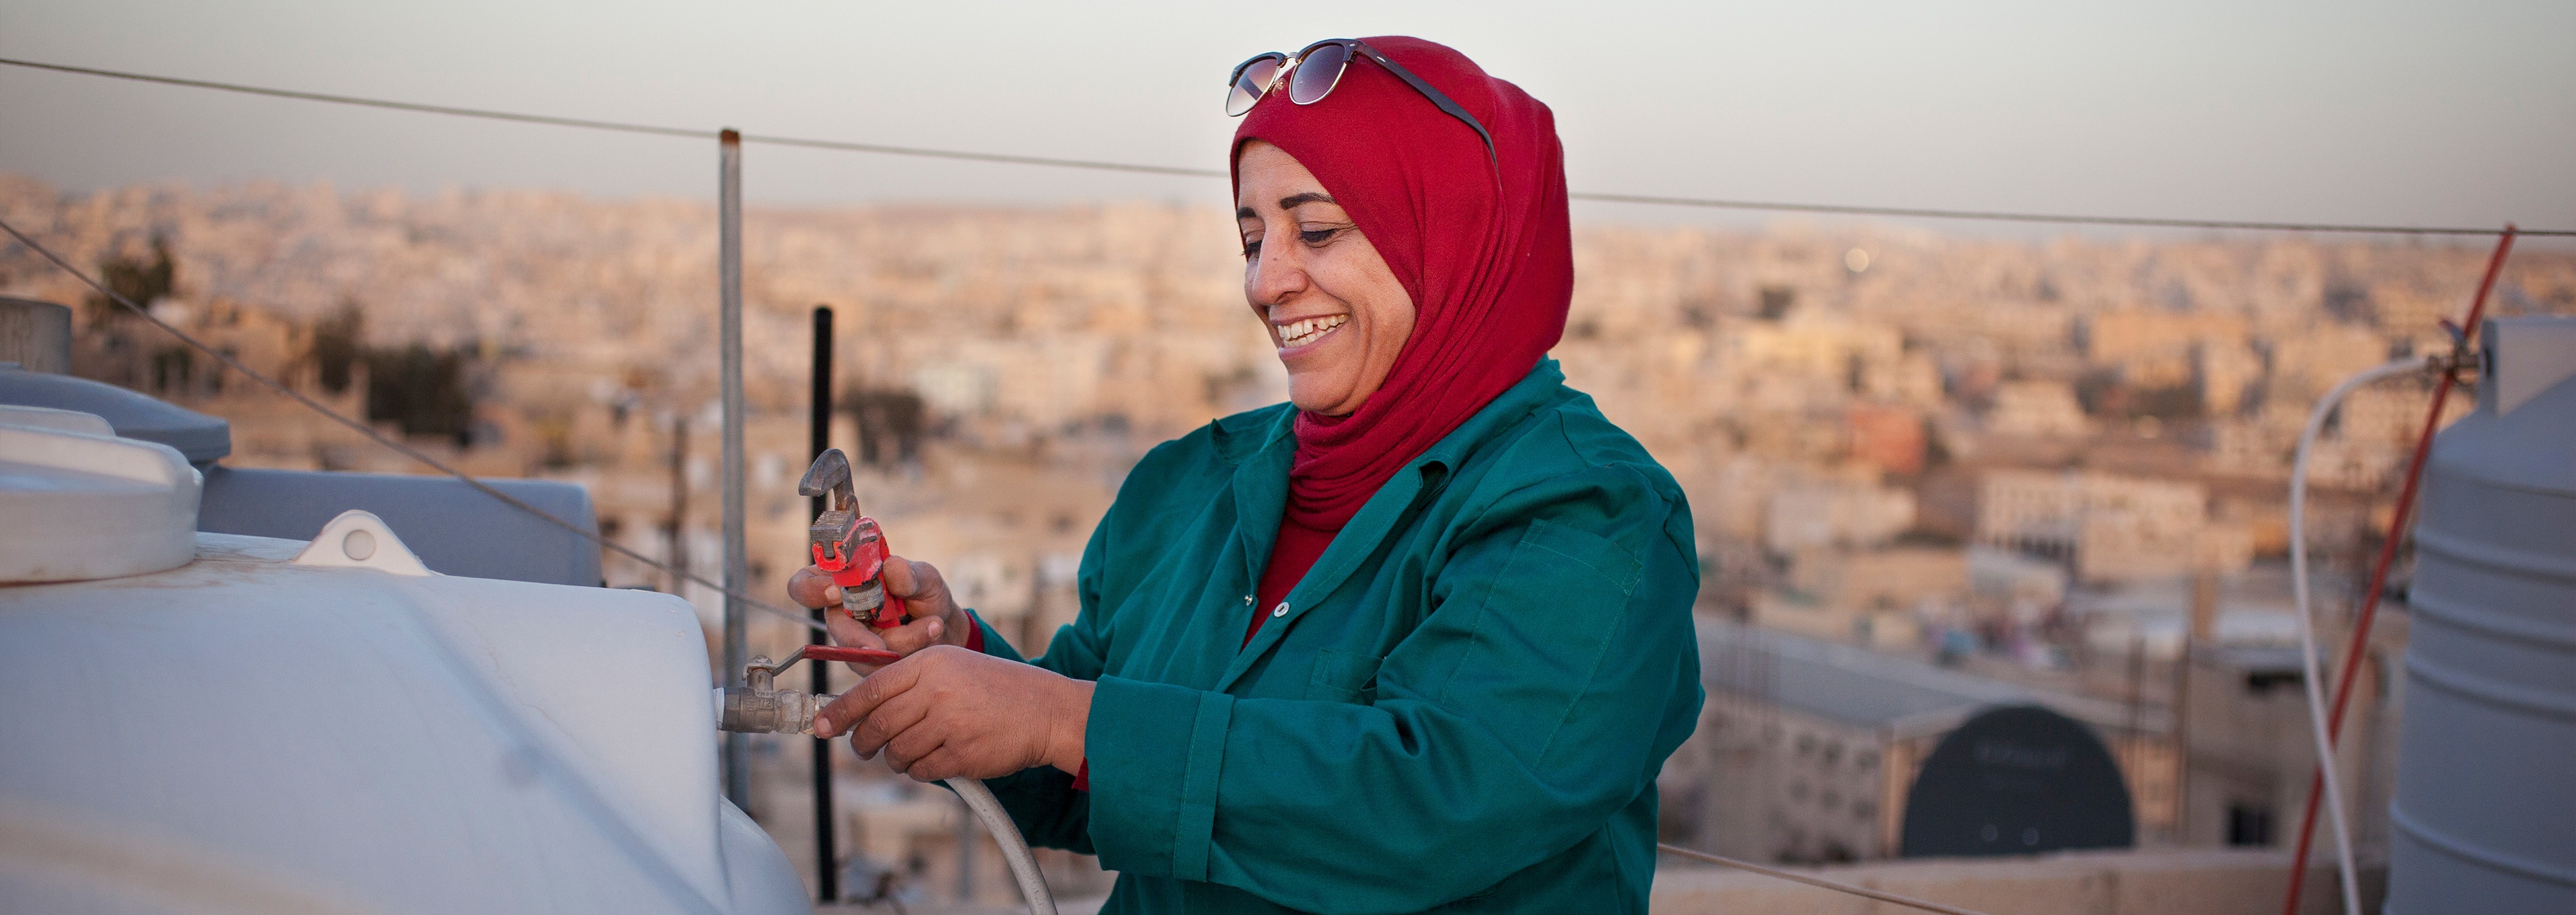 LVRSustainable for Oxfam: Empowering Women, Improving Society | Mariam's Story